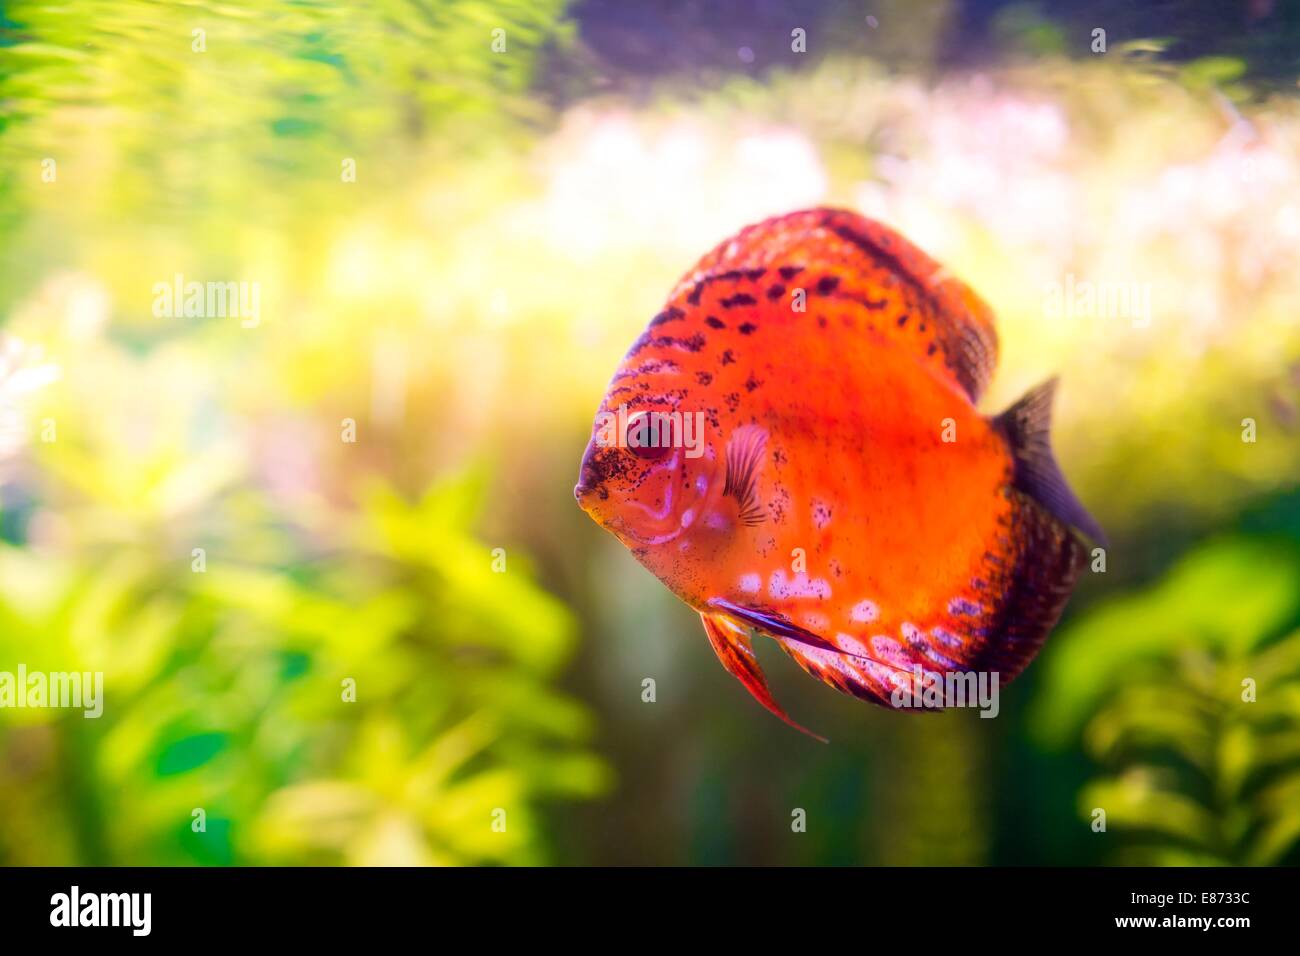 Symphysodon discus in an aquarium on a green background Stock Photo